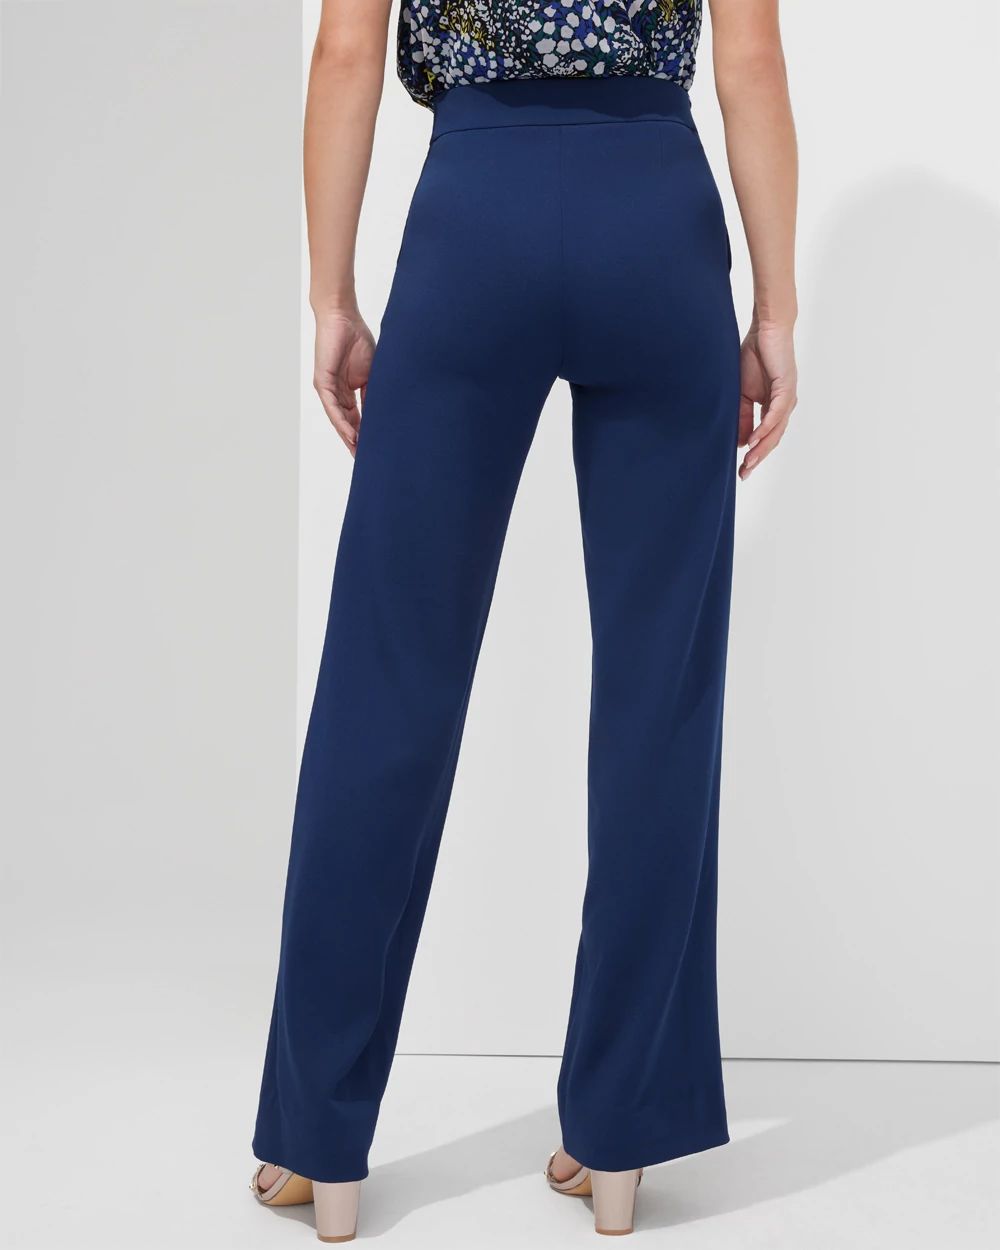 Outlet WHBM Pull-On Wide-Leg Pants click to view larger image.